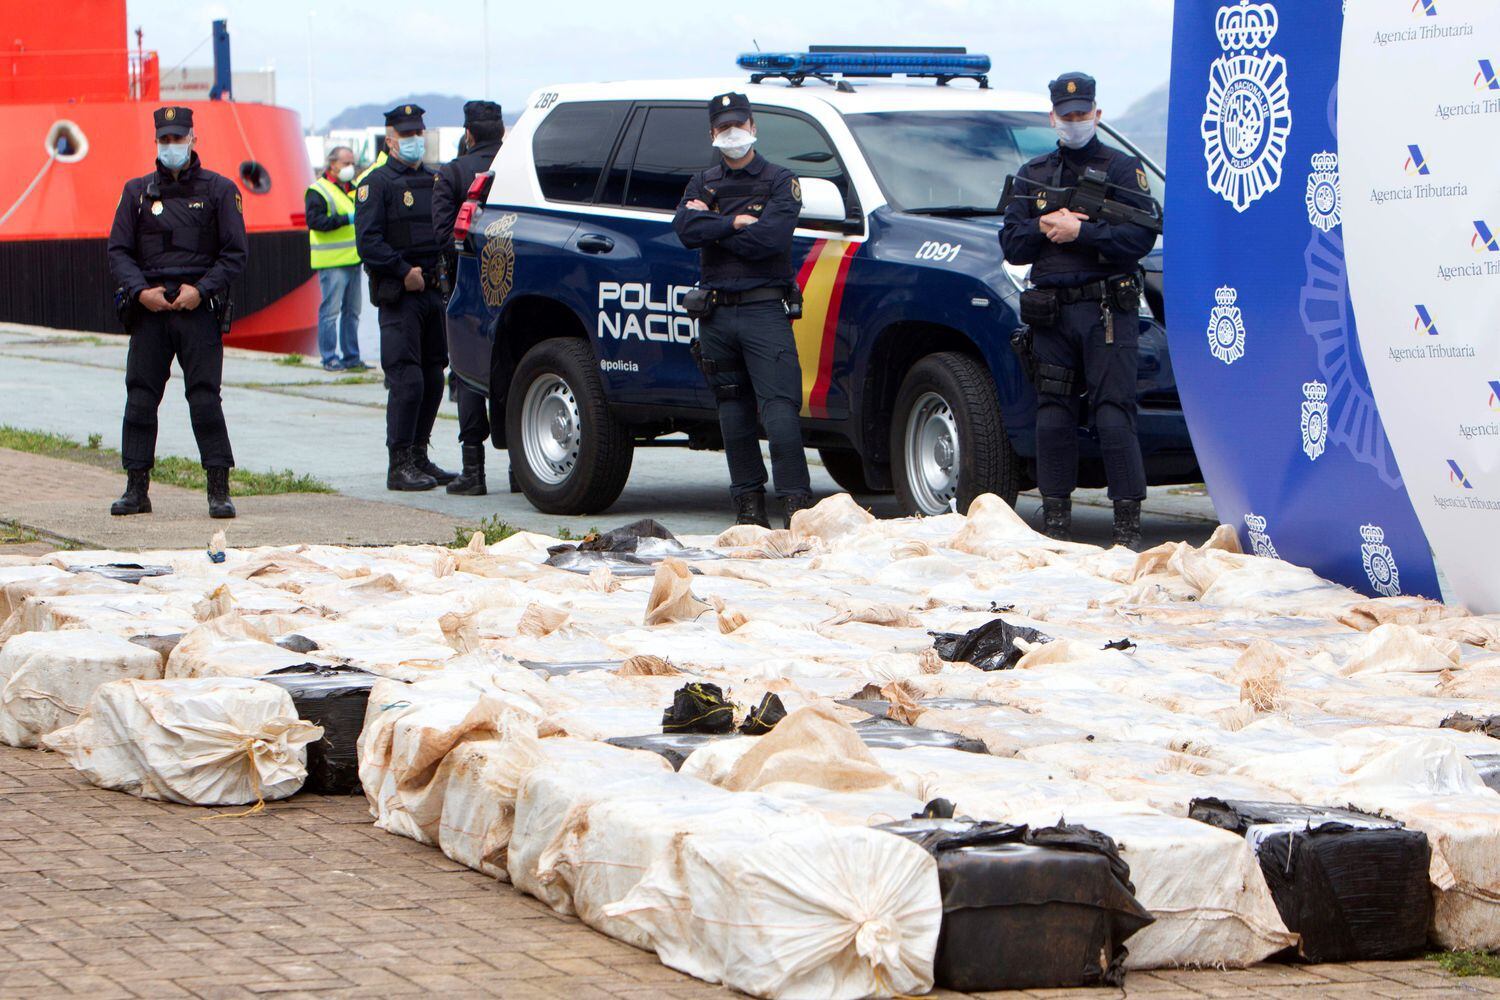 Police with four tons of cocaine seized last April in Vigo, Galicia.